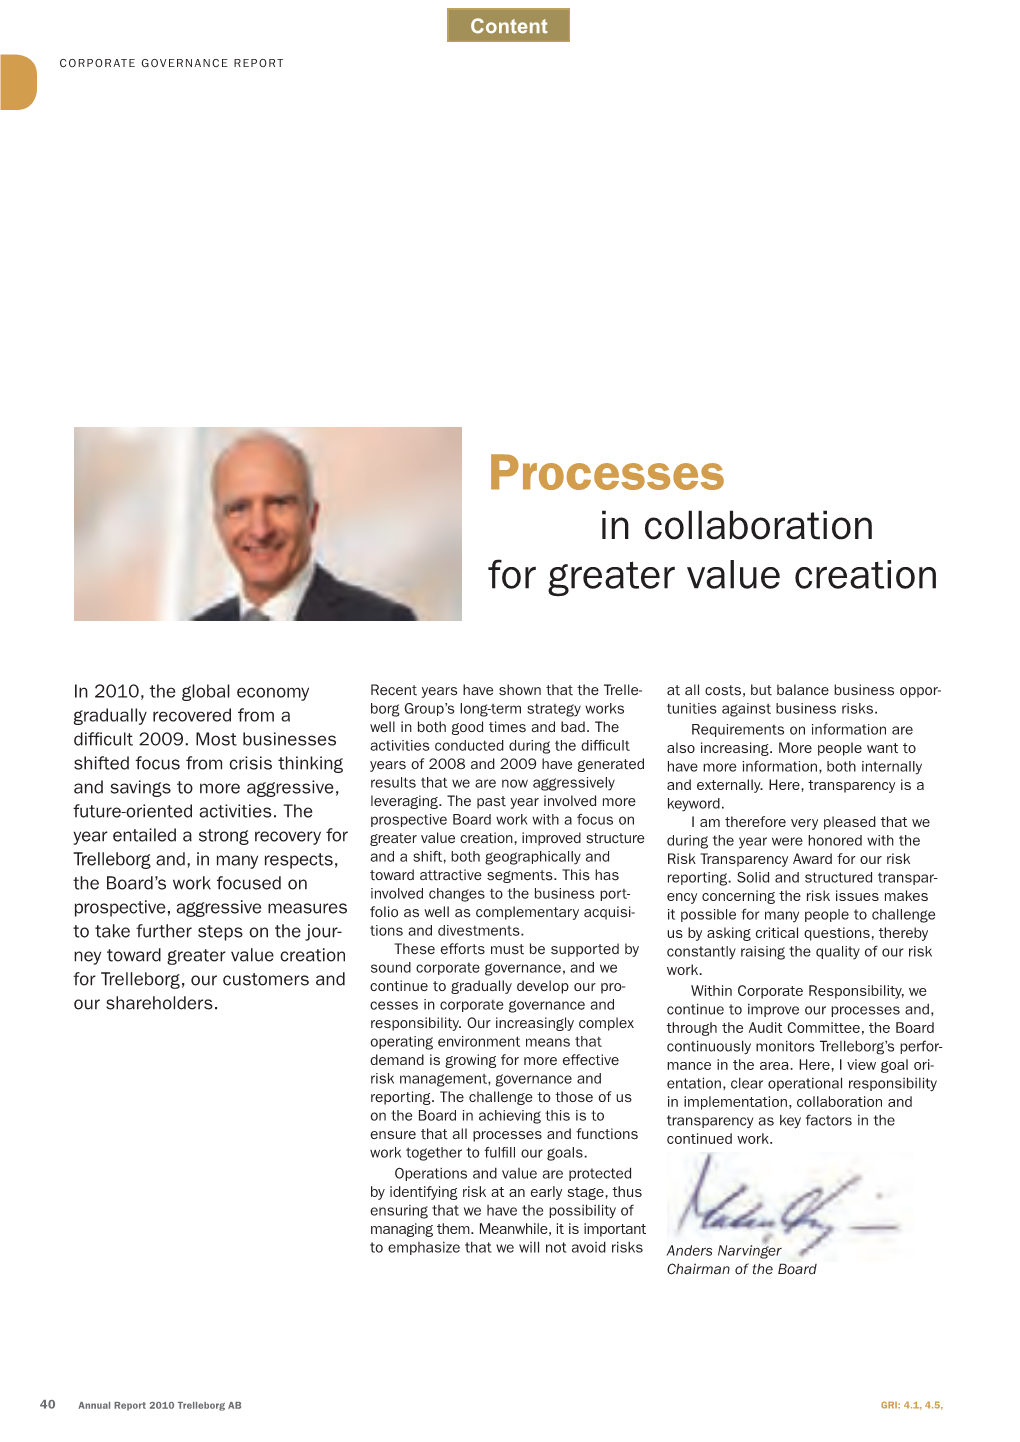 Processes in Collaboration for Greater Value Creation